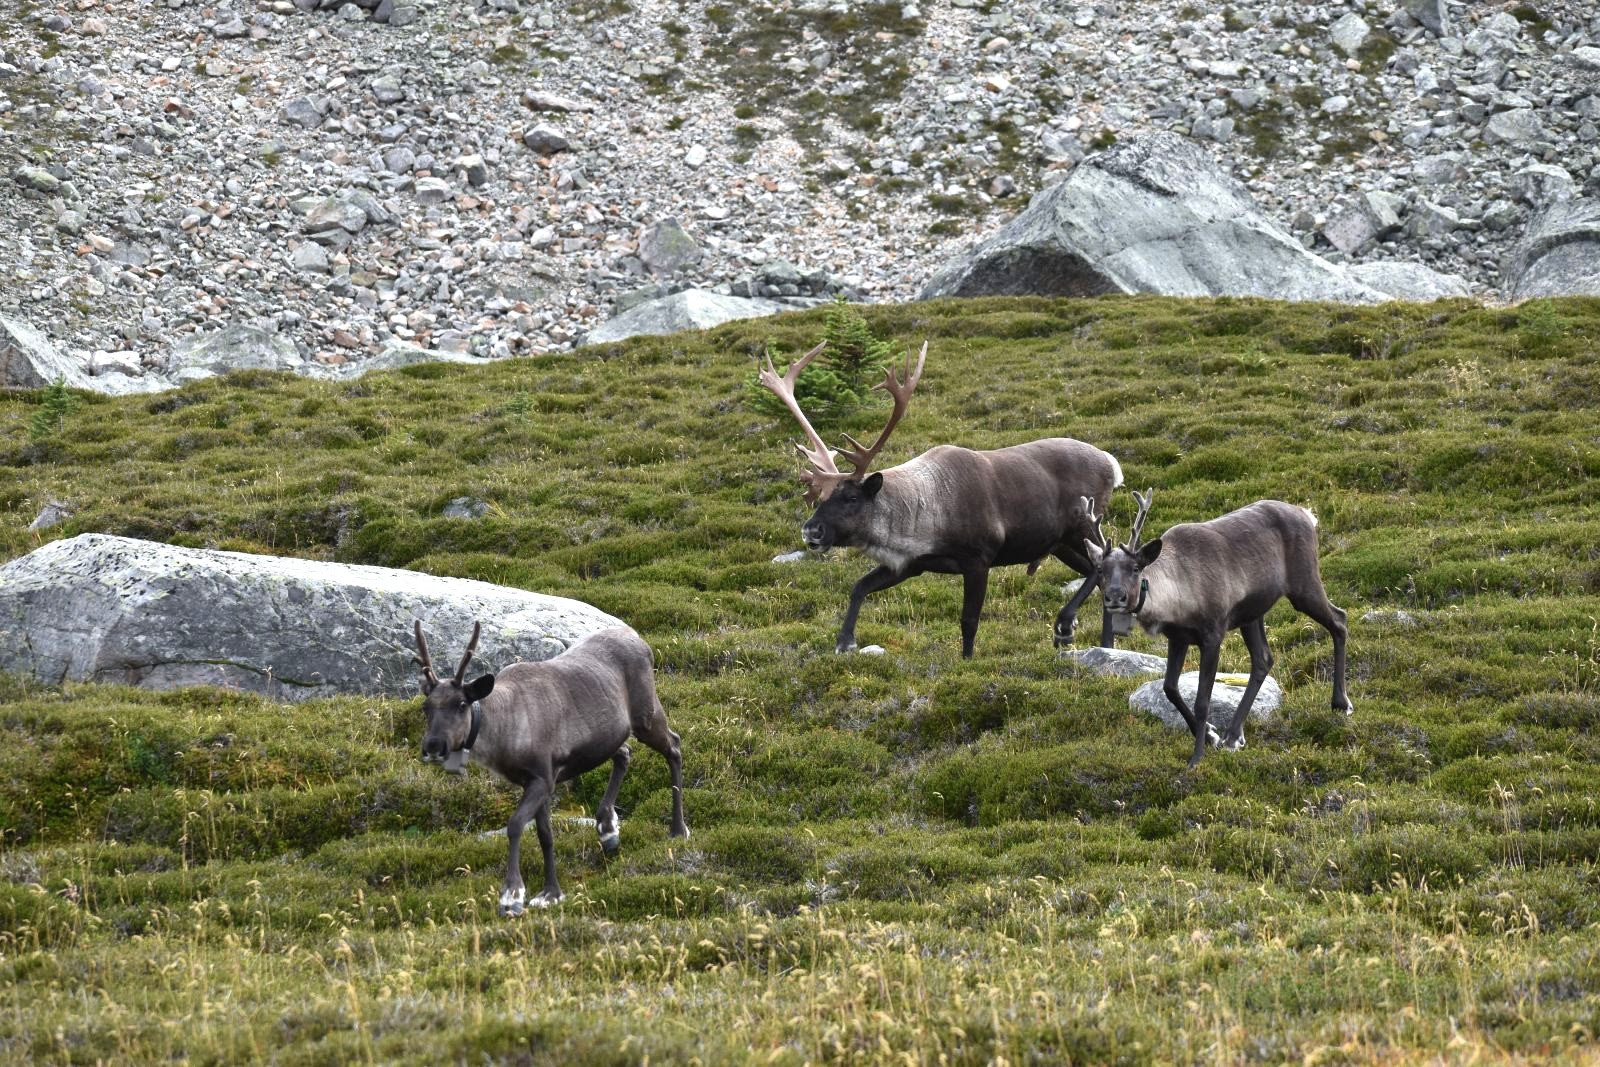 Three woodland caribou are shown walking through a grassy sub-alpine meadow, with a rocky slope in the background. 